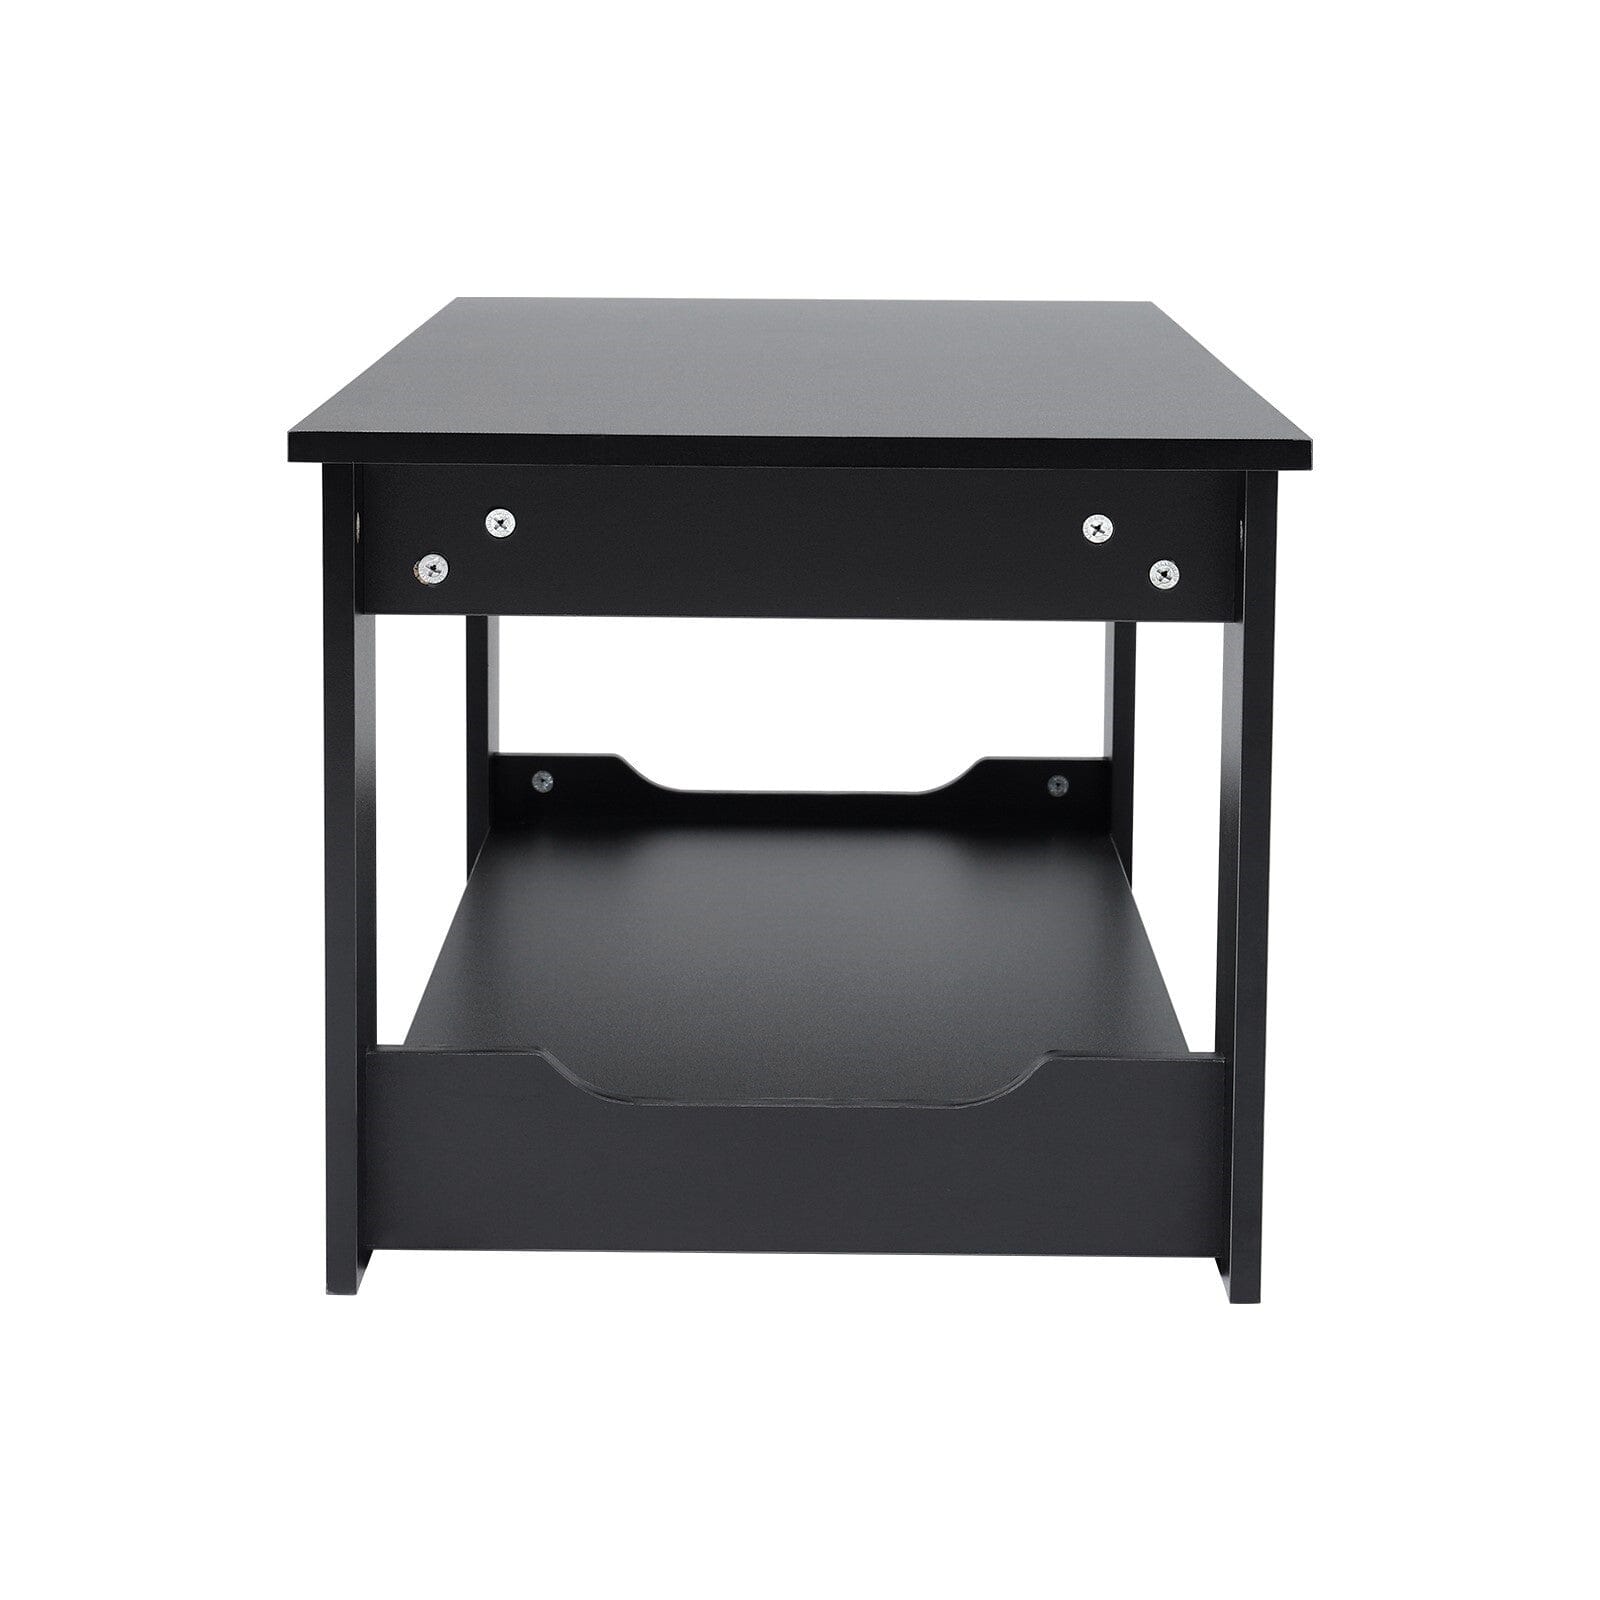 Modern Style Black Coffee Table Living Room with One Shelf Coffee Tables Living and Home 